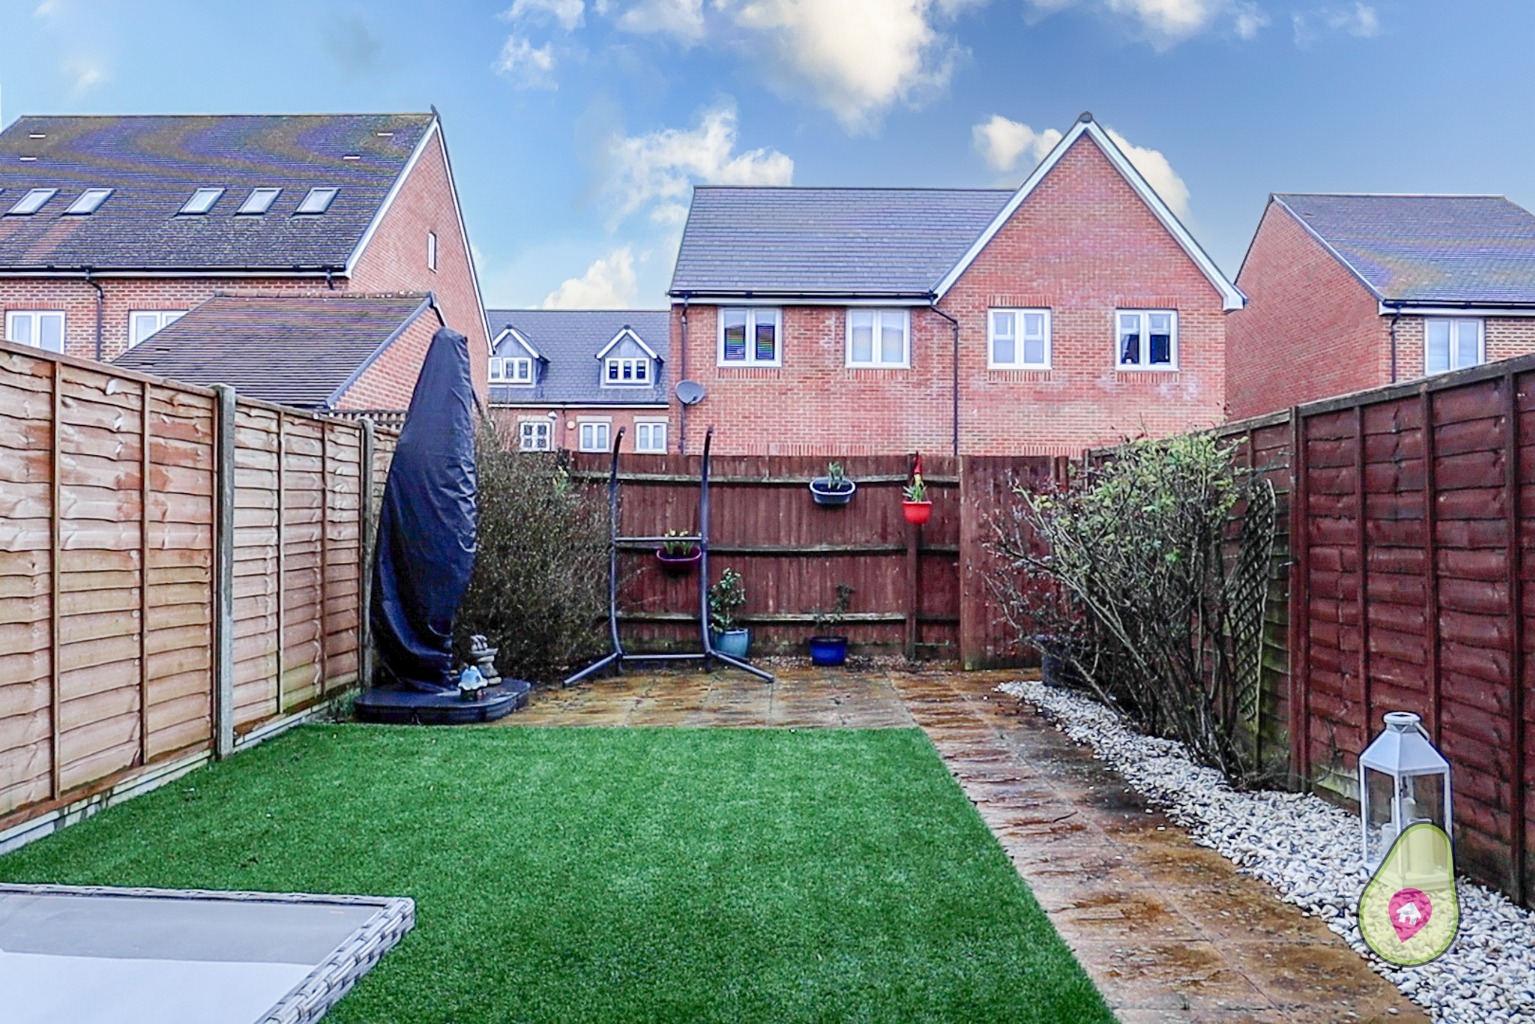 4 bed terraced house for sale in Cuckoo Lane, Bracknell  - Property Image 16